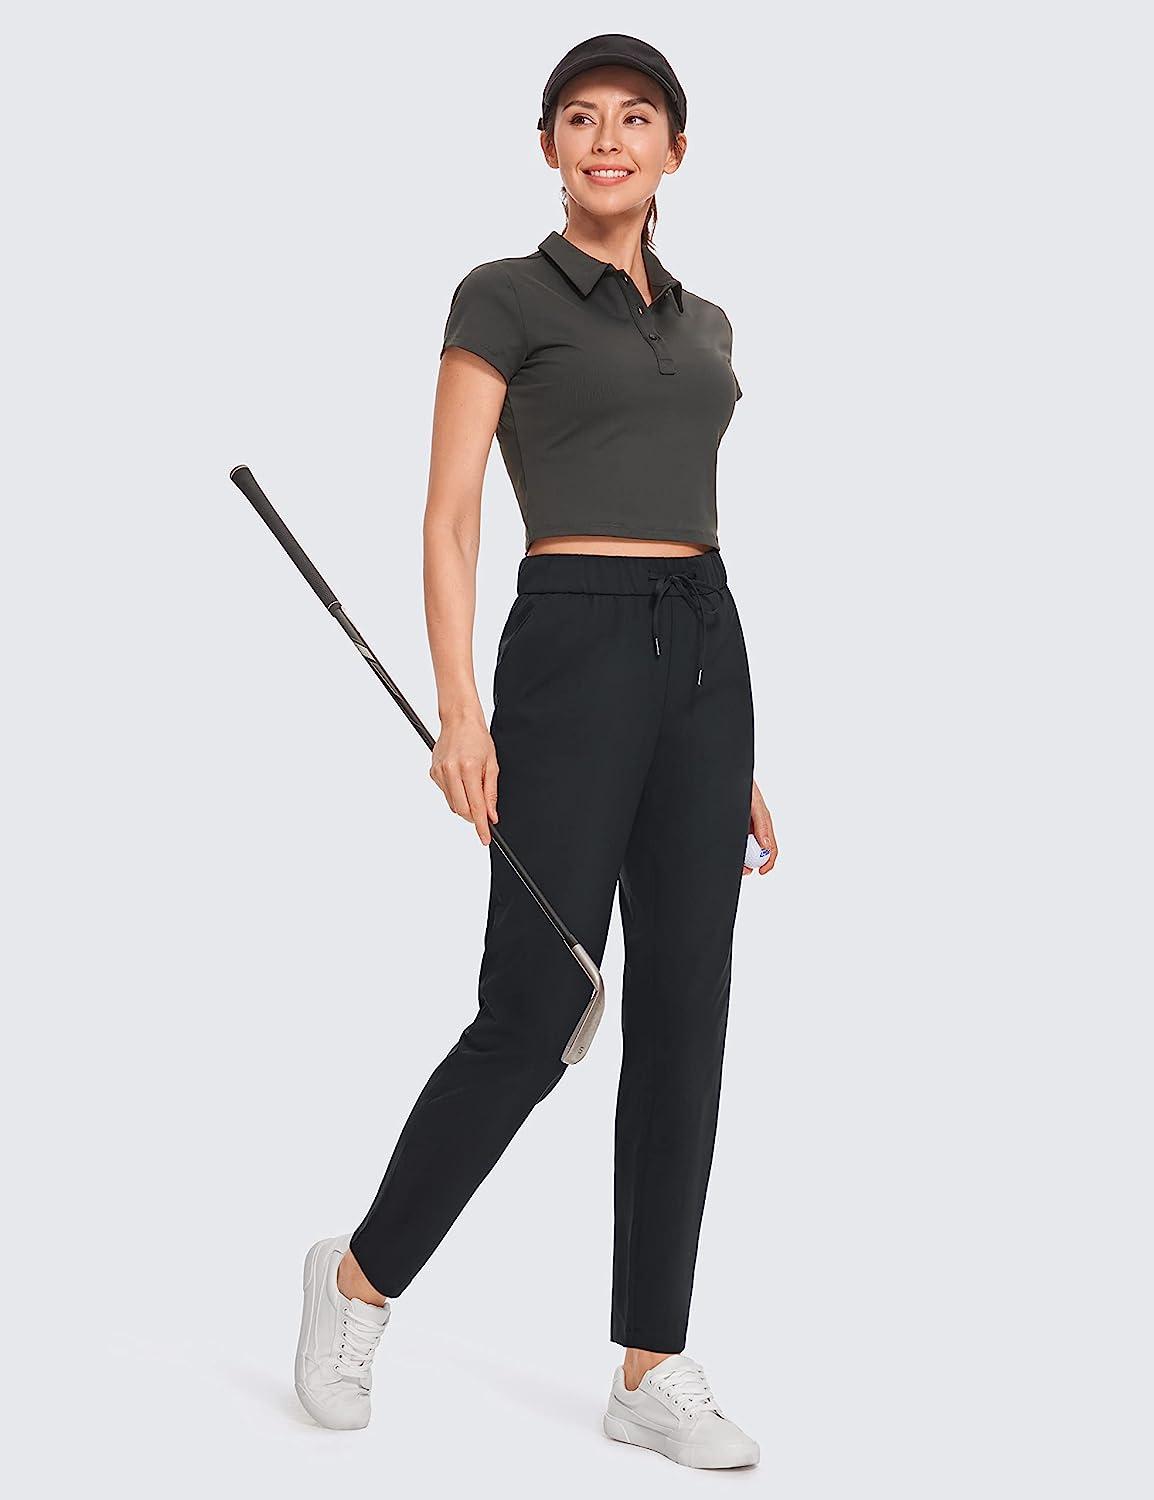 CRZ YOGA Womens 4-Way Stretch Casual Golf Pants Tall 29 - Sweatpants  Travel Lounge Outdoor Workout Athletic Pockets Trousers 29 inches Large  Black